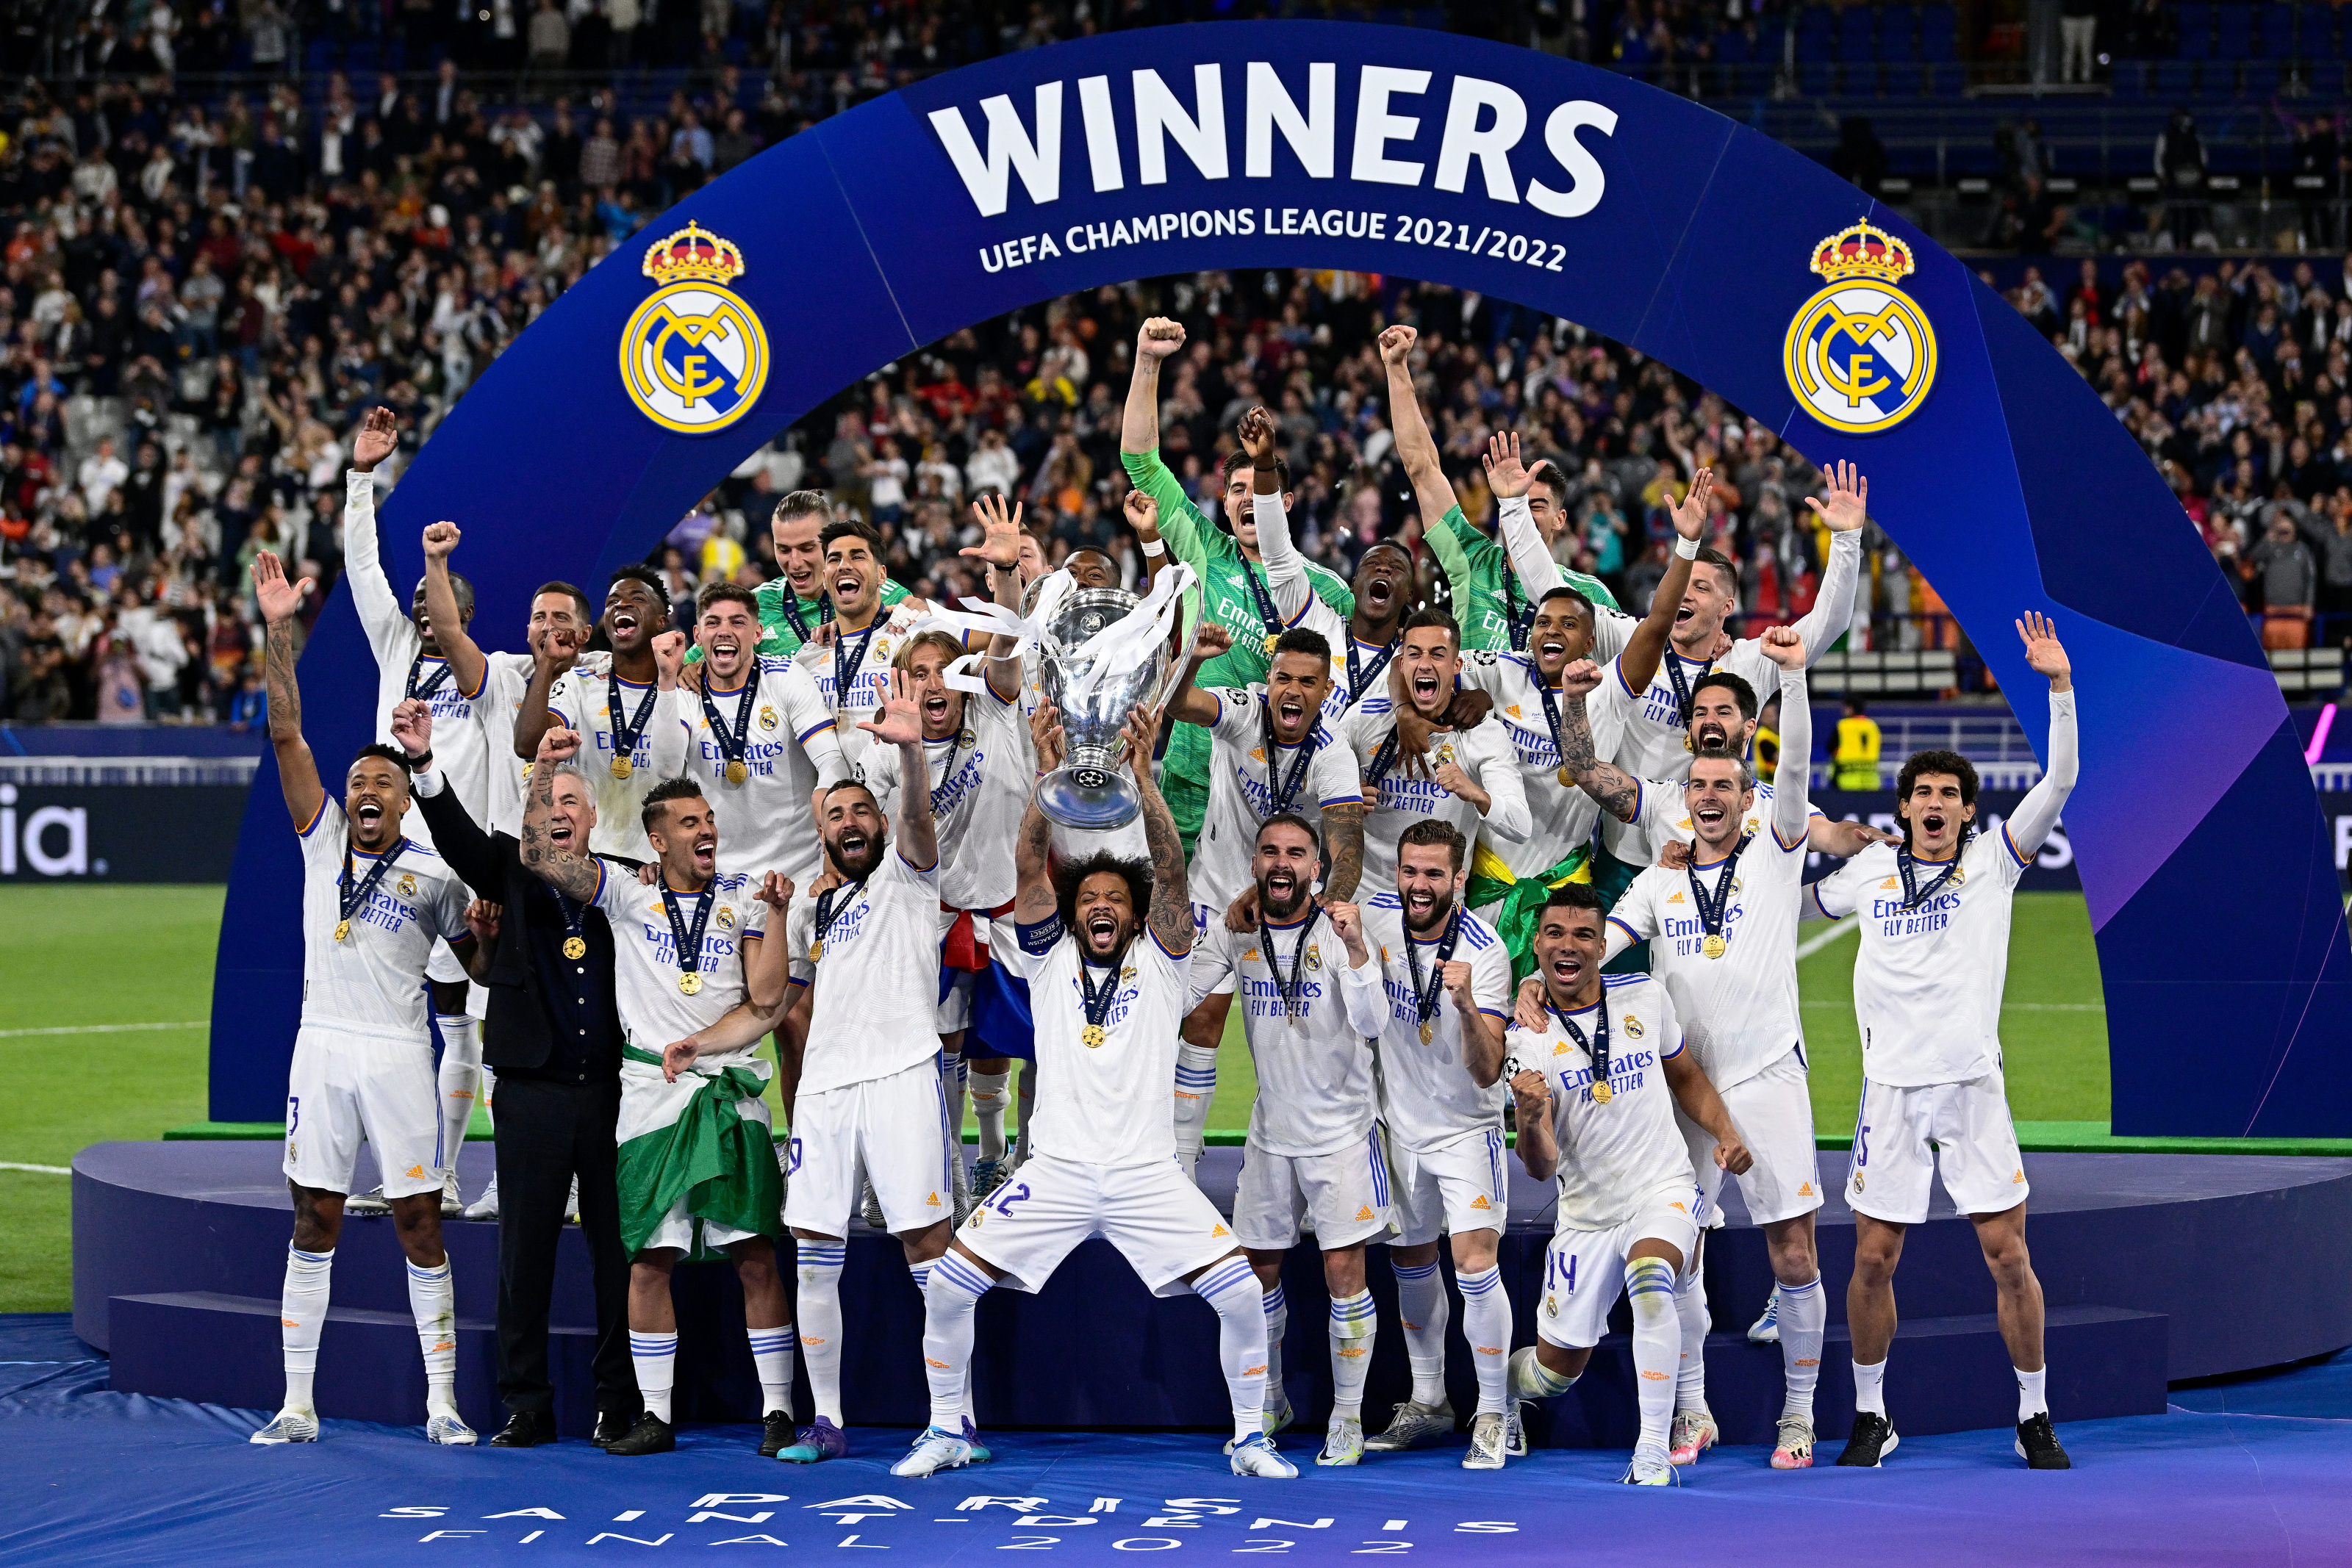 Real Madrid Champions League Wallpapers